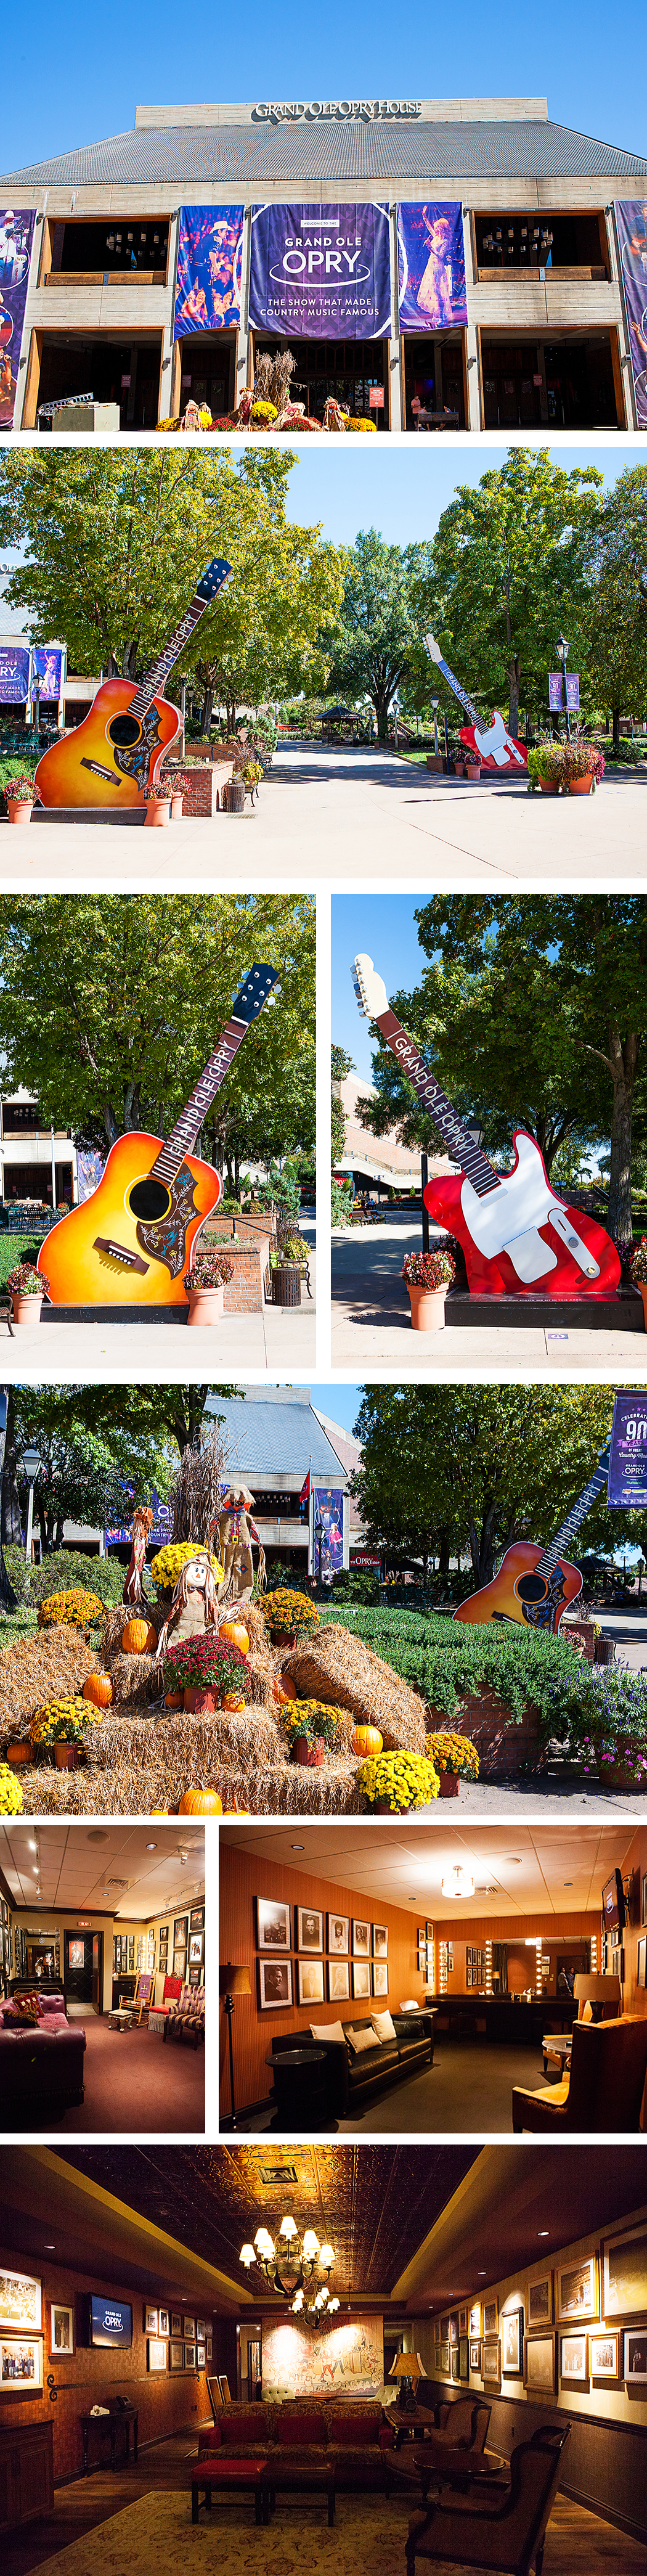 Grand Ole Opry | Nashville, Tennessee